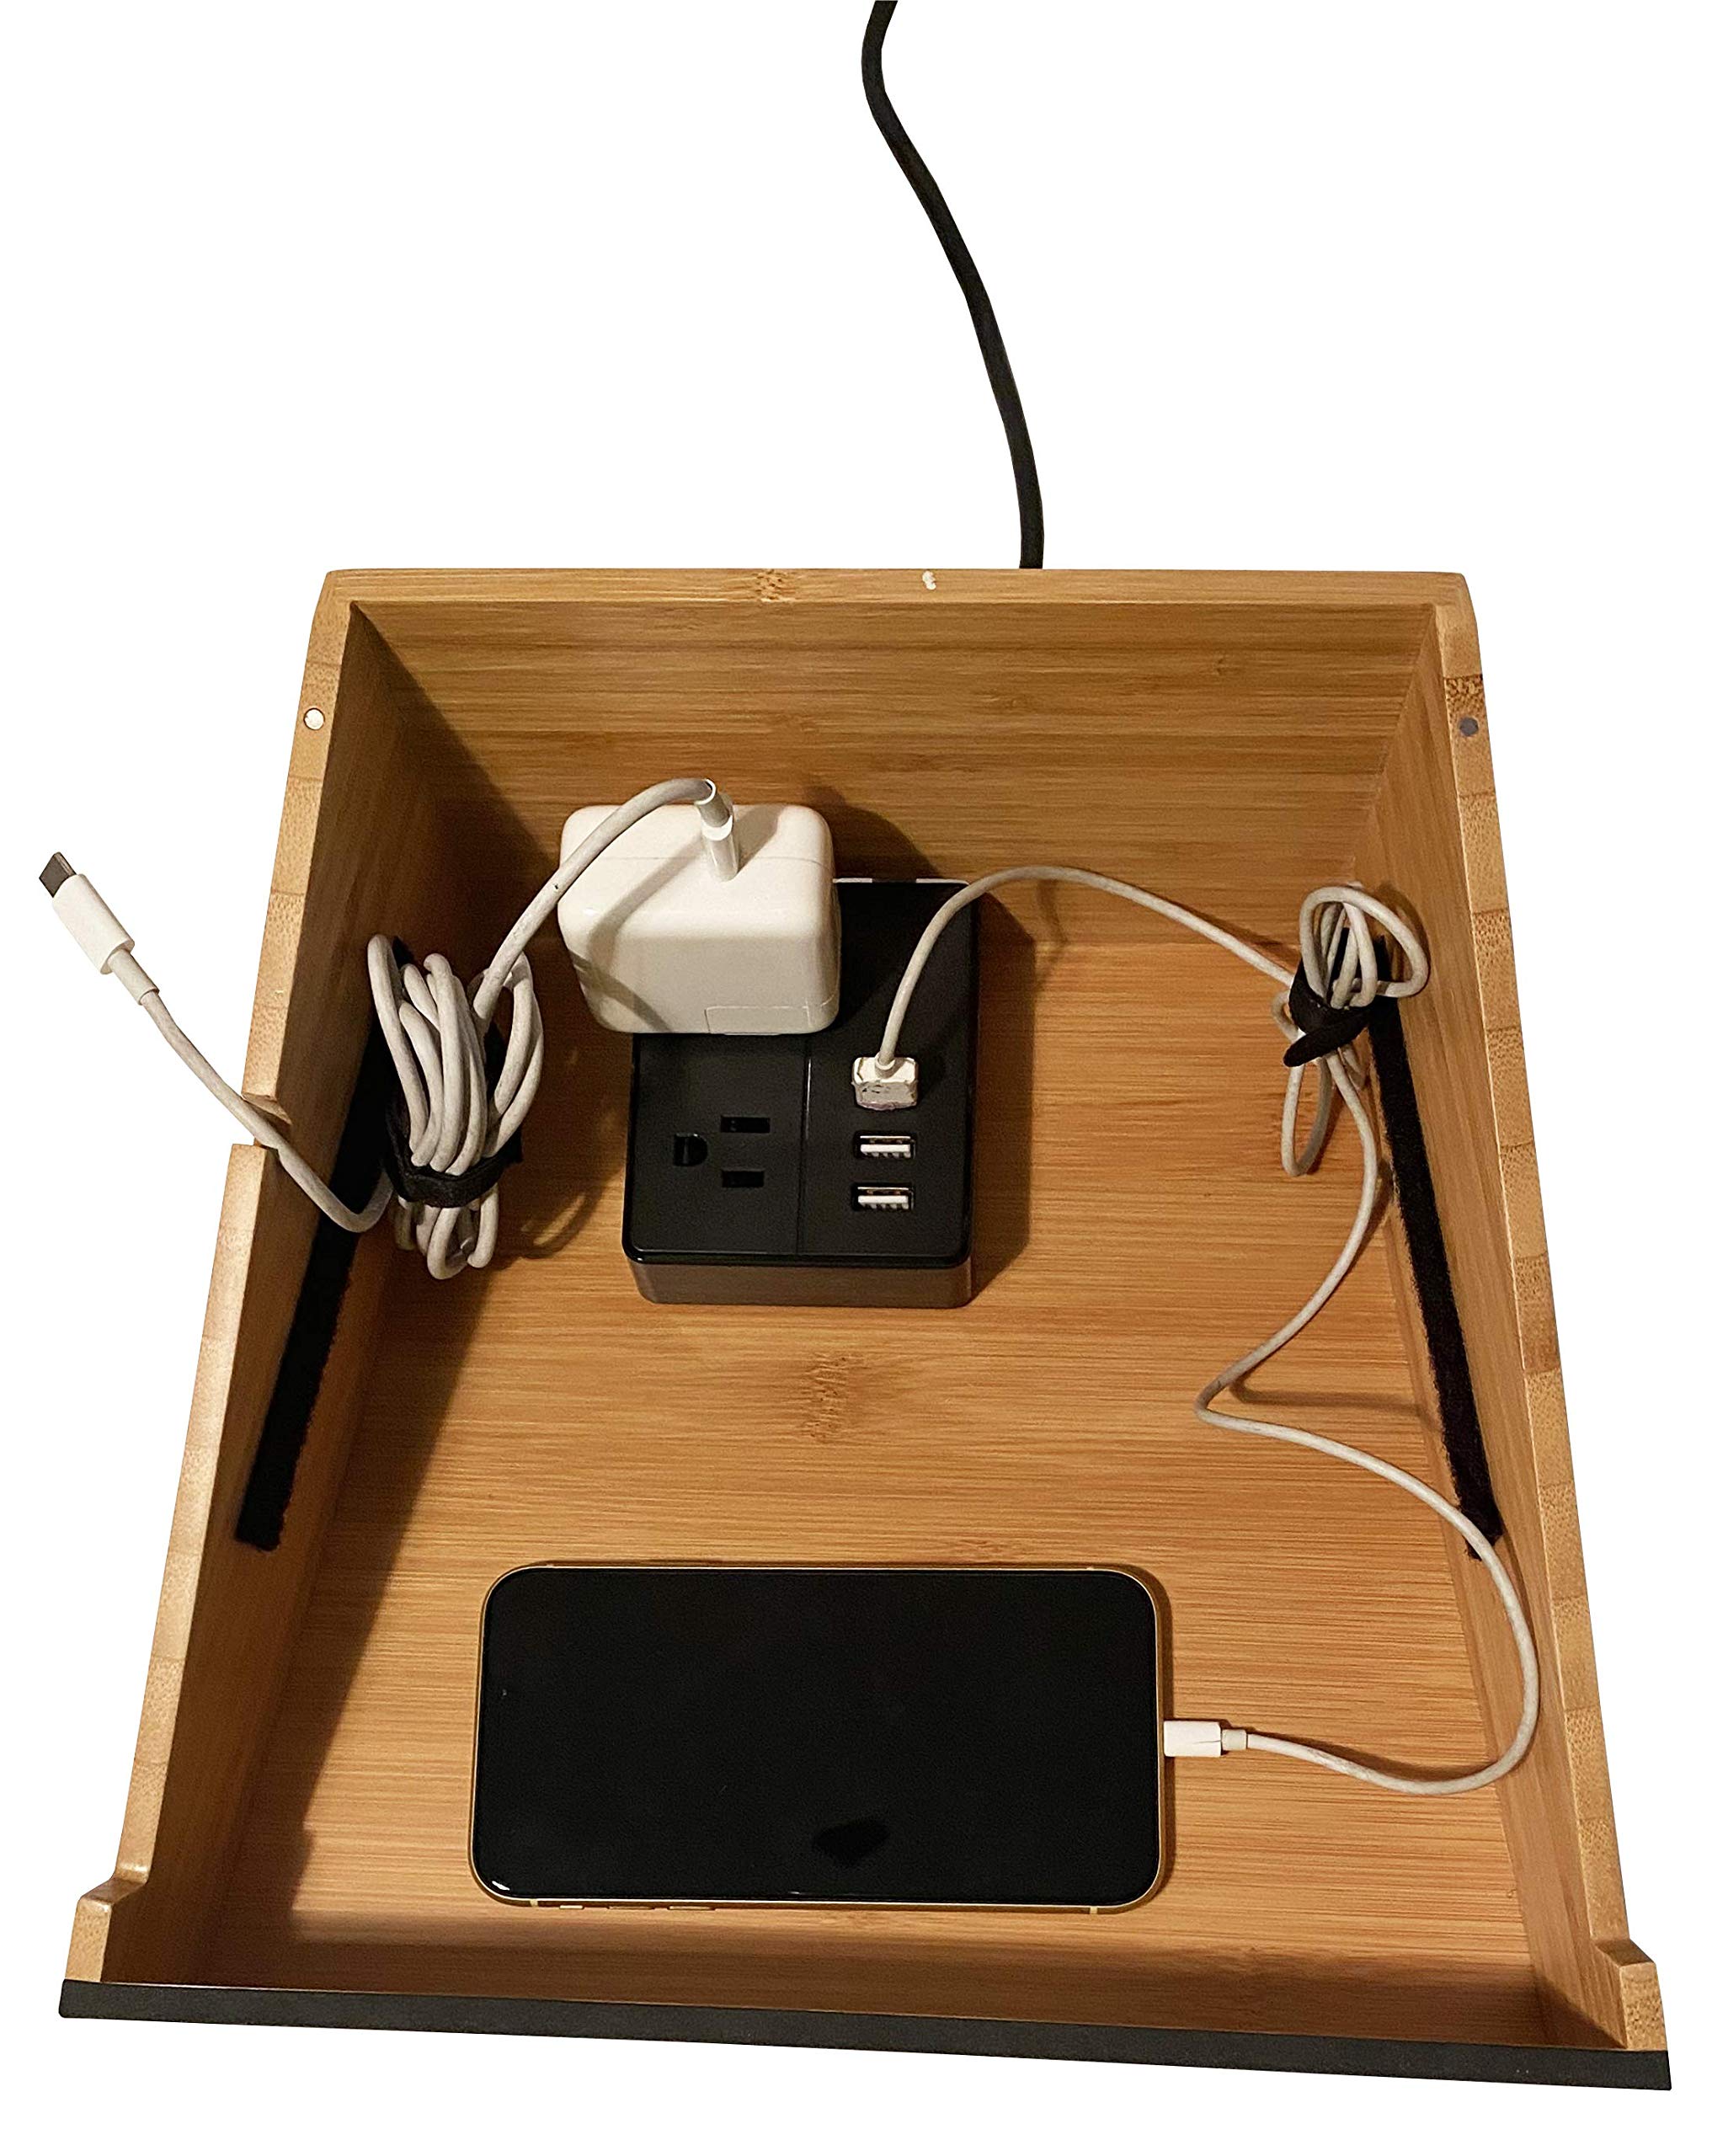 G.U.S. Laptop Stand and Organizer with Built-in Power Hub and Dry Erase Board. Perfect for Work from Home. Multifunctional and Sturdy with Redesigned Stand. (Bamboo)